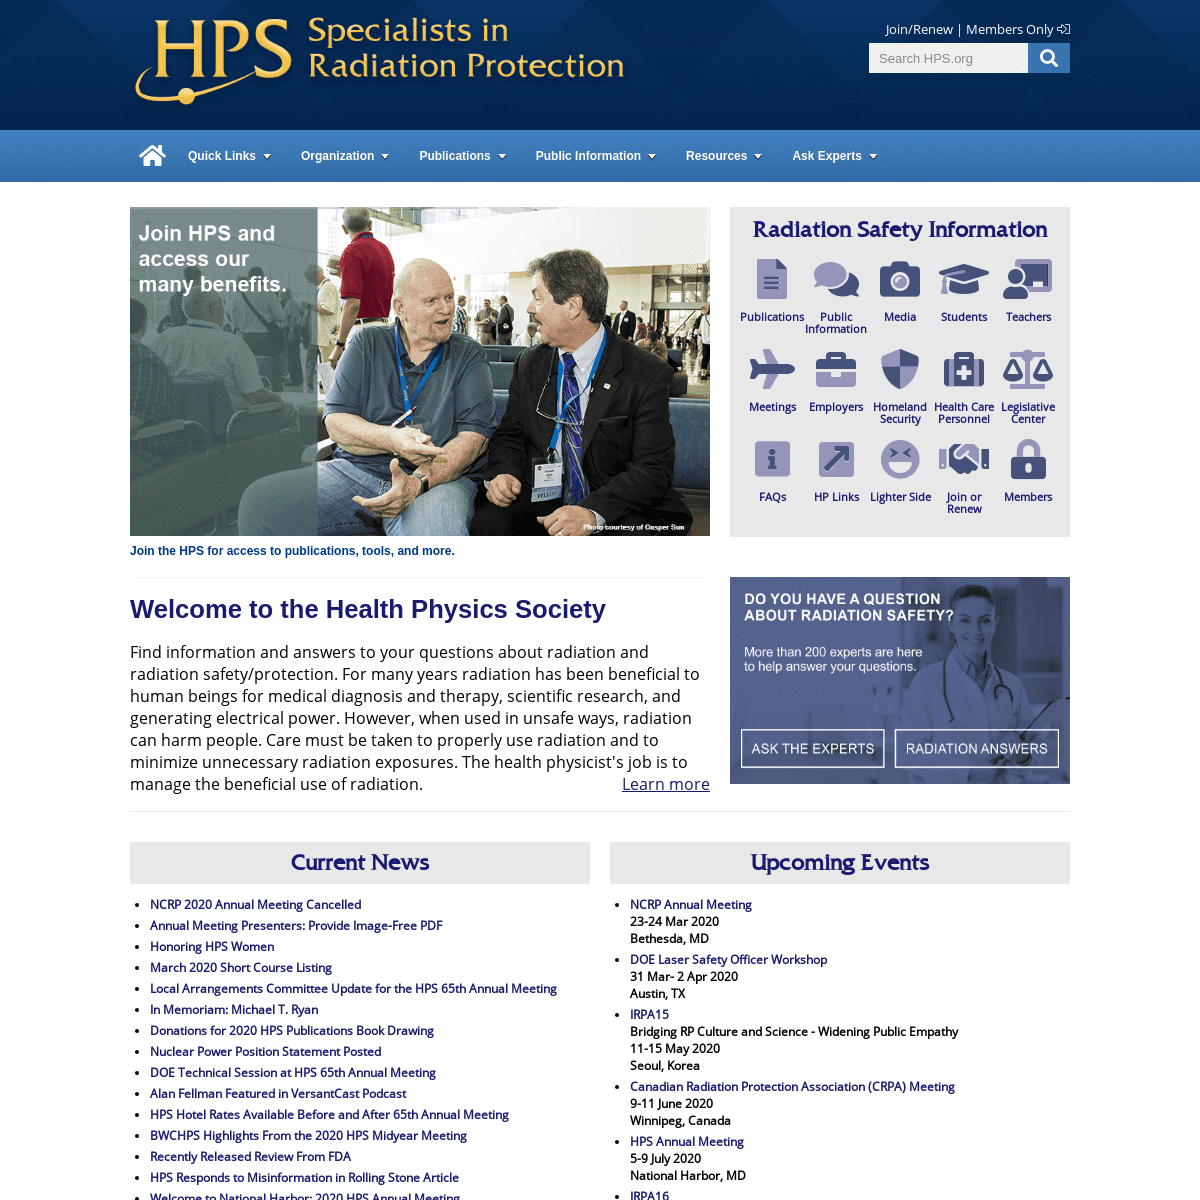 A complete backup of hps.org